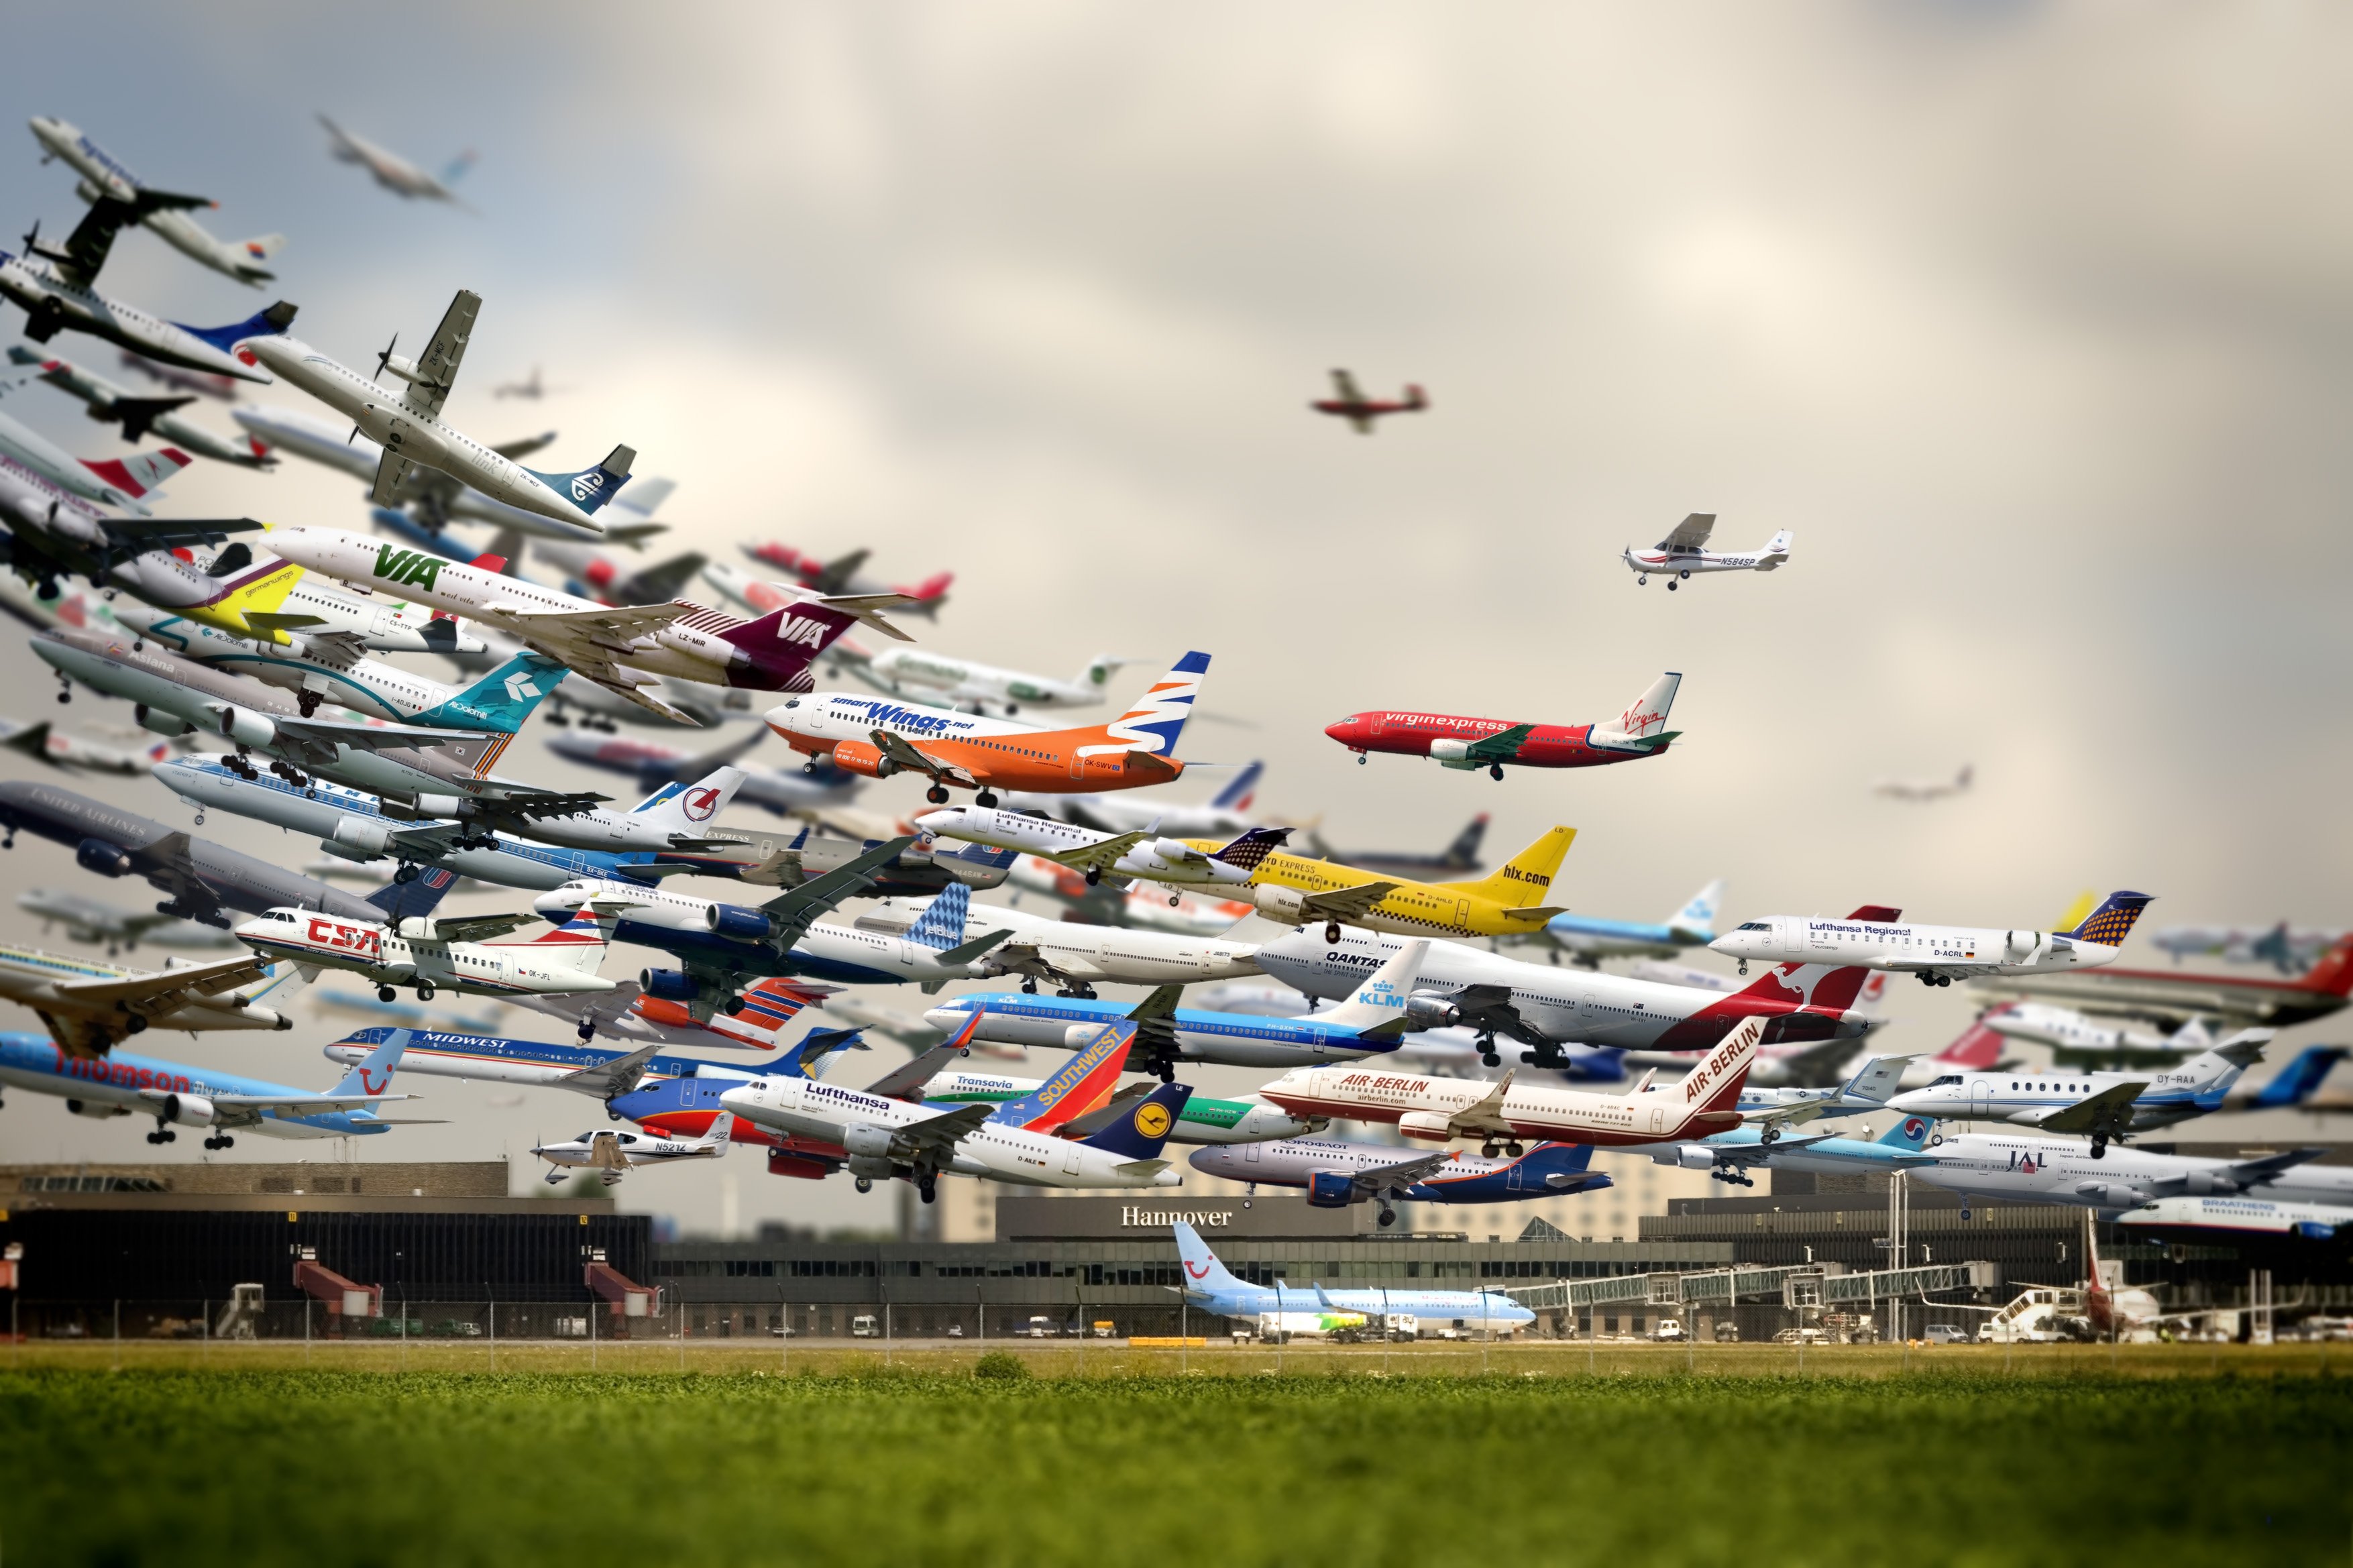 Five Hours of Plane Landings in 30 Seconds – Where Do You Get Your Inspiration?